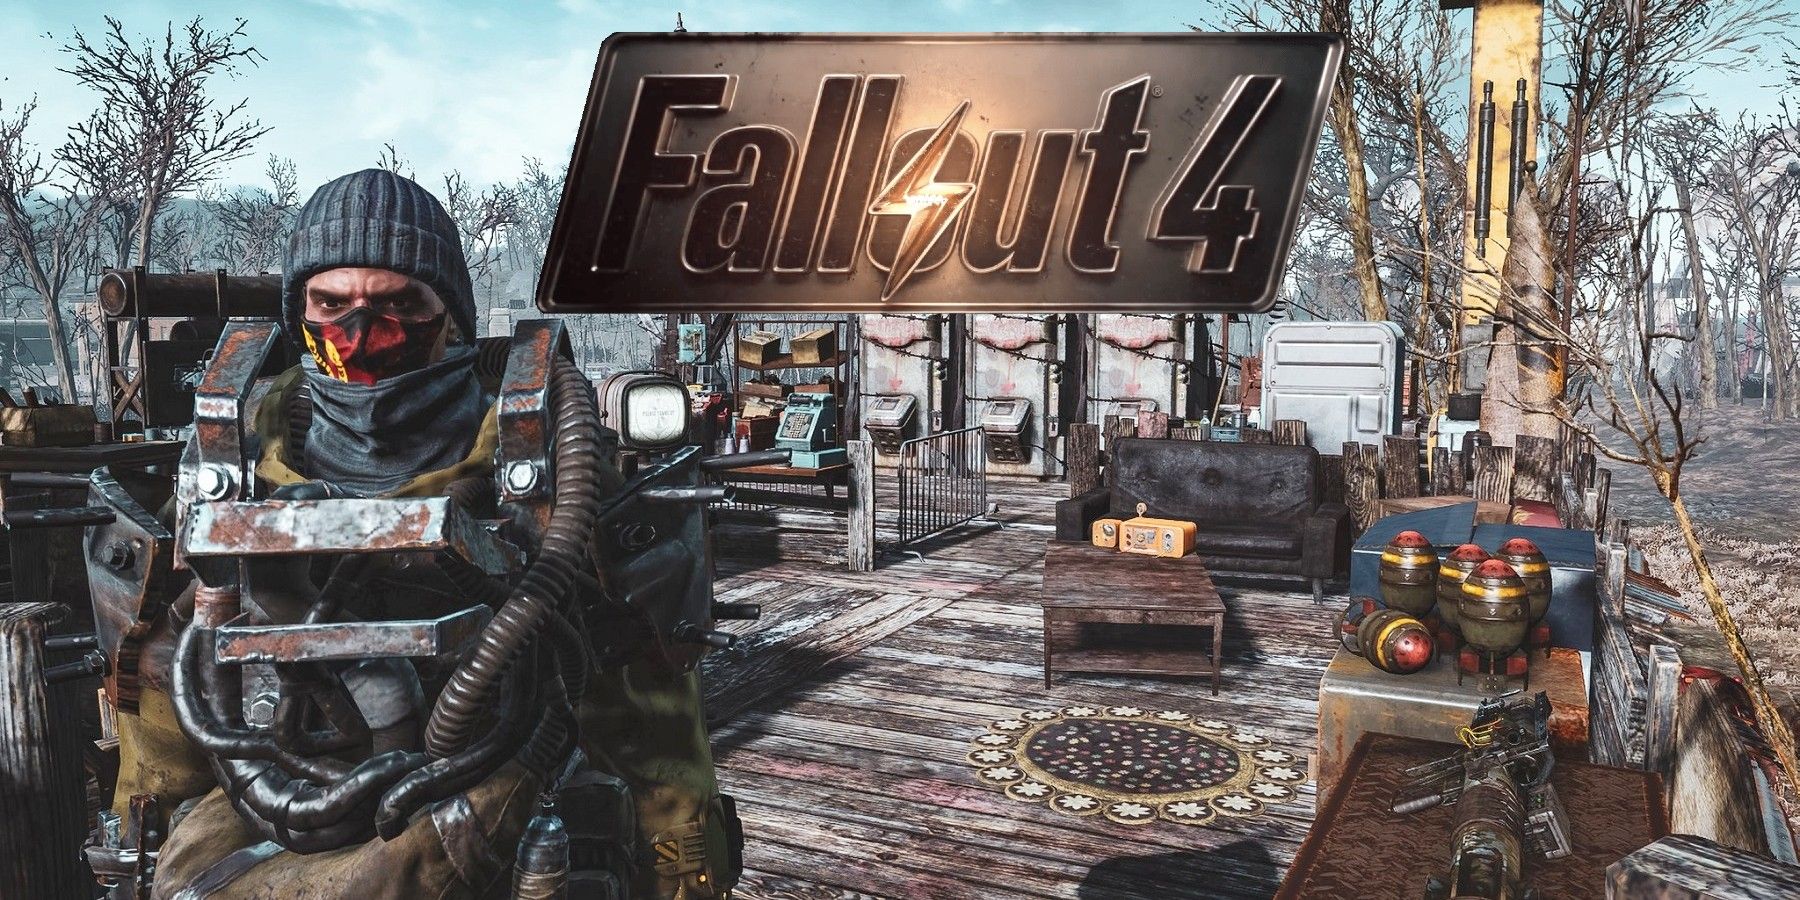 Best building fallout 4 фото 103